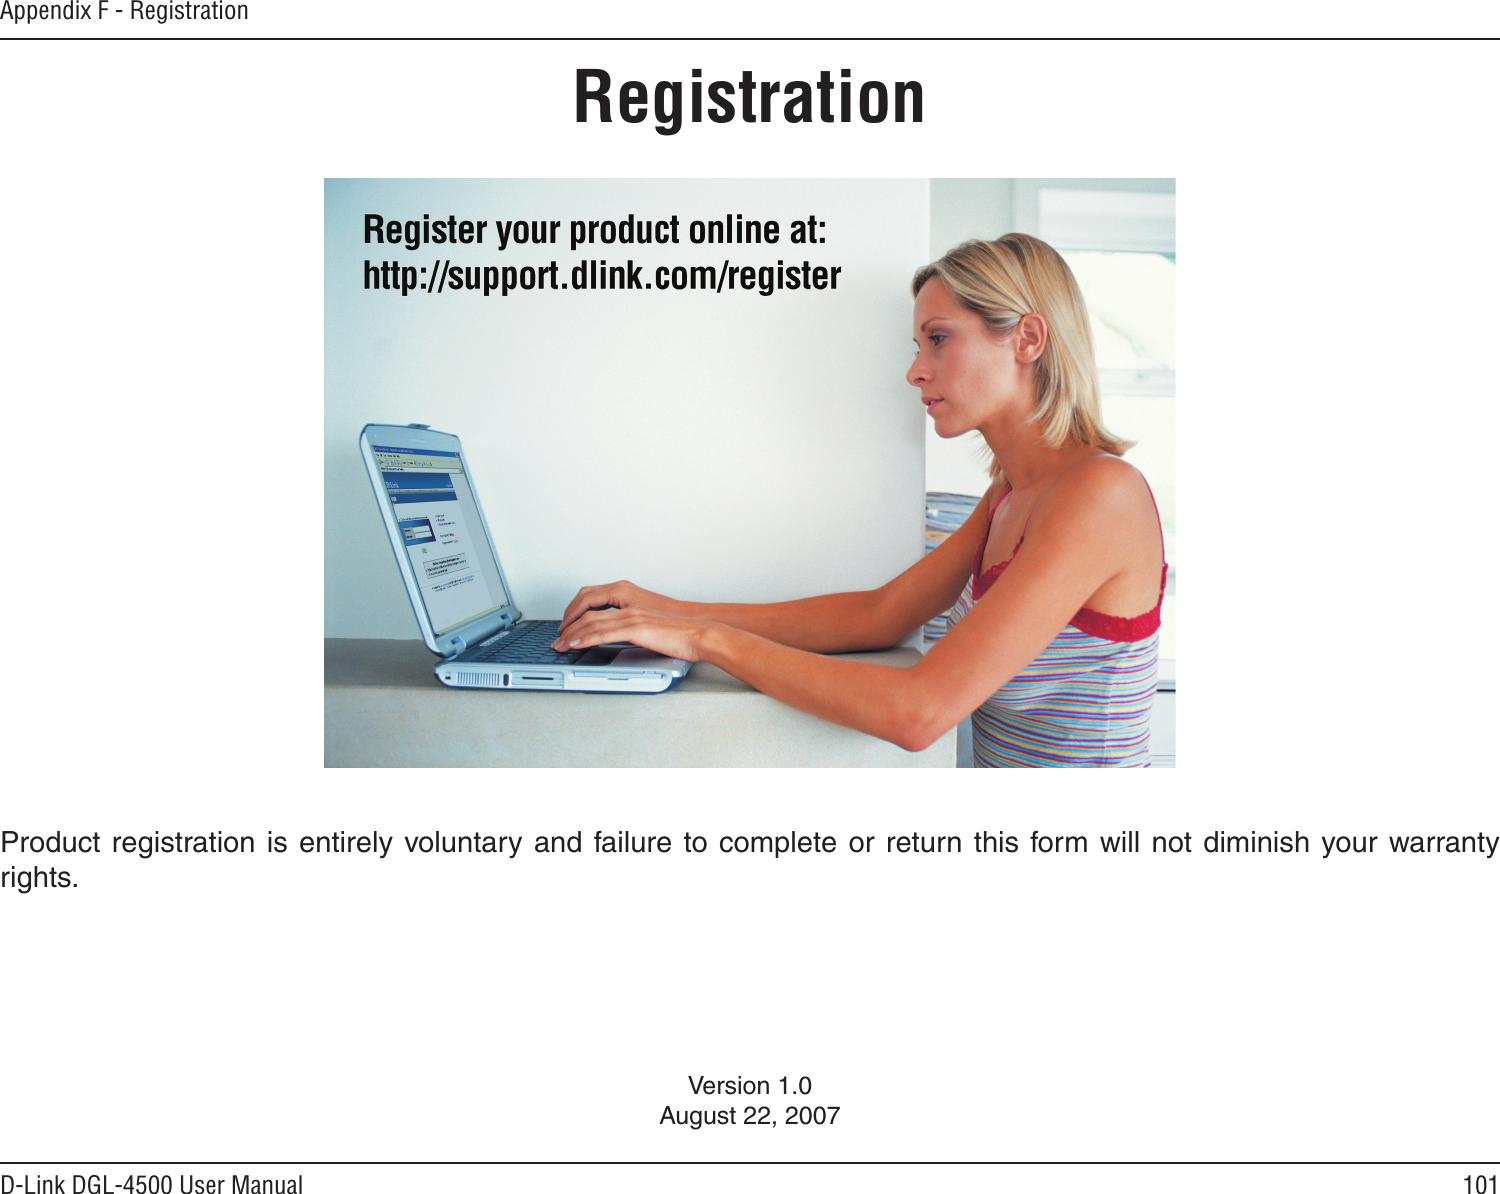 101D-Link DGL-4500 User ManualAppendix F - RegistrationVersion 1.0August 22, 2007Product registration is  entirely voluntary and failure to complete or return  this form will not diminish your warranty rights.Registration